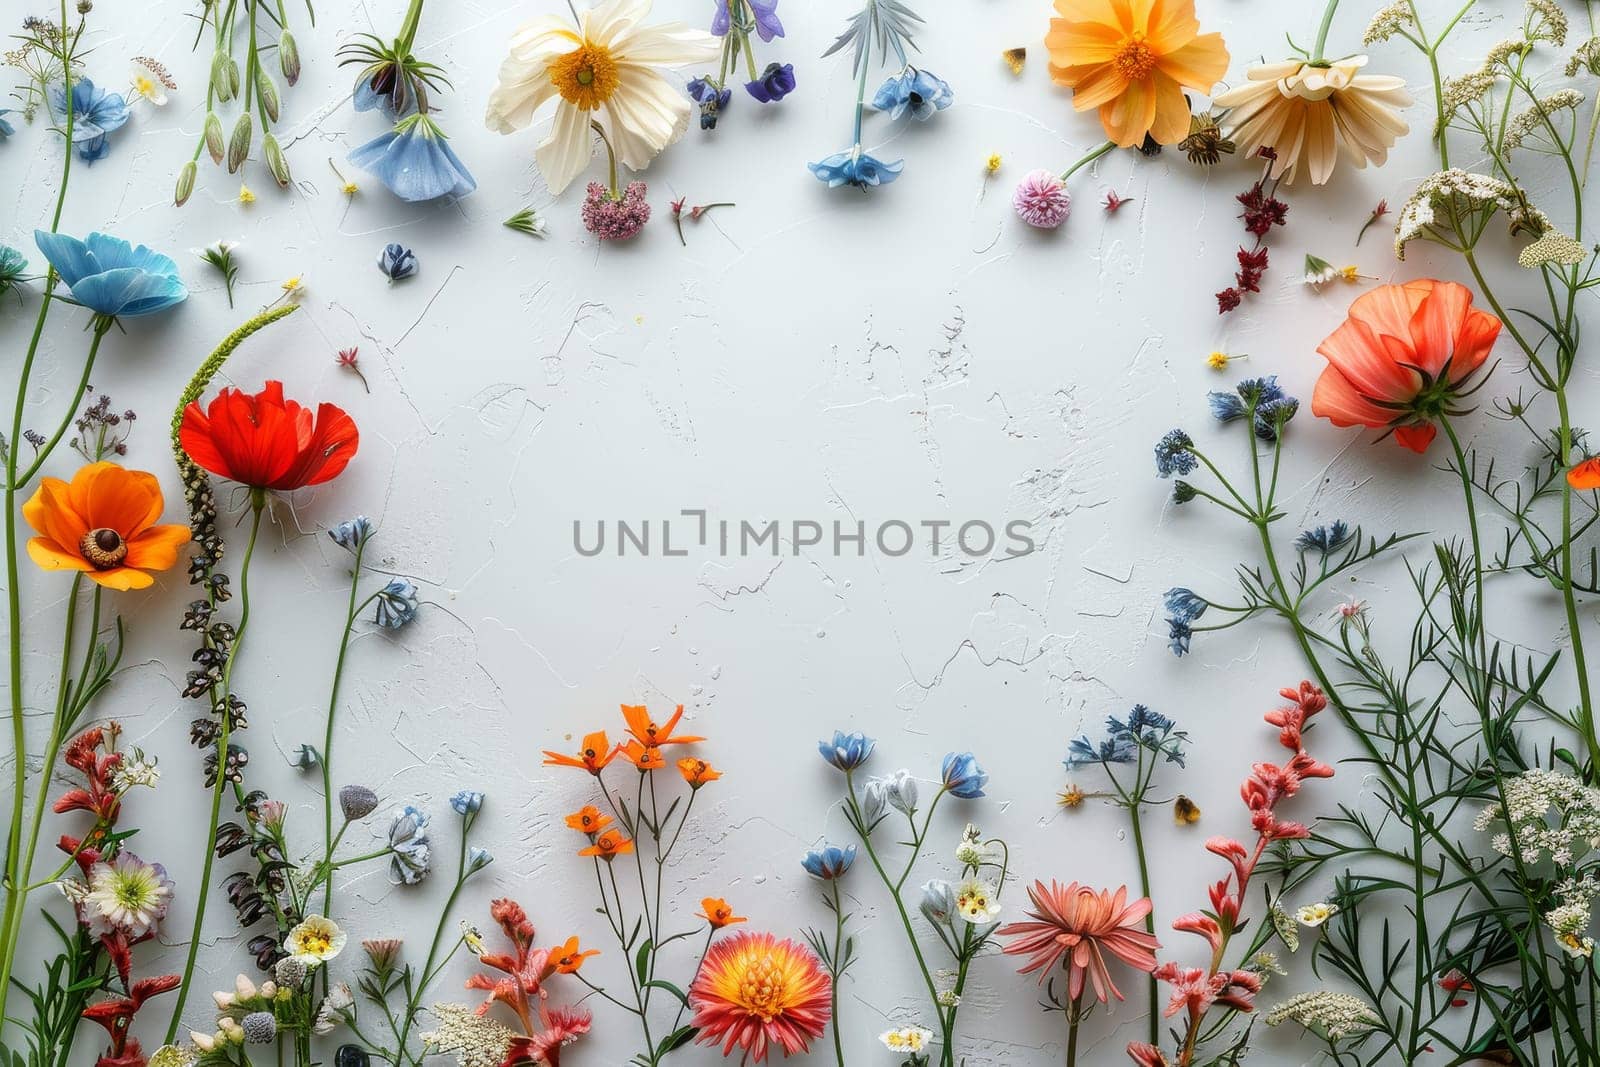 A white frame with a floral border and a large orange flower in the center by itchaznong